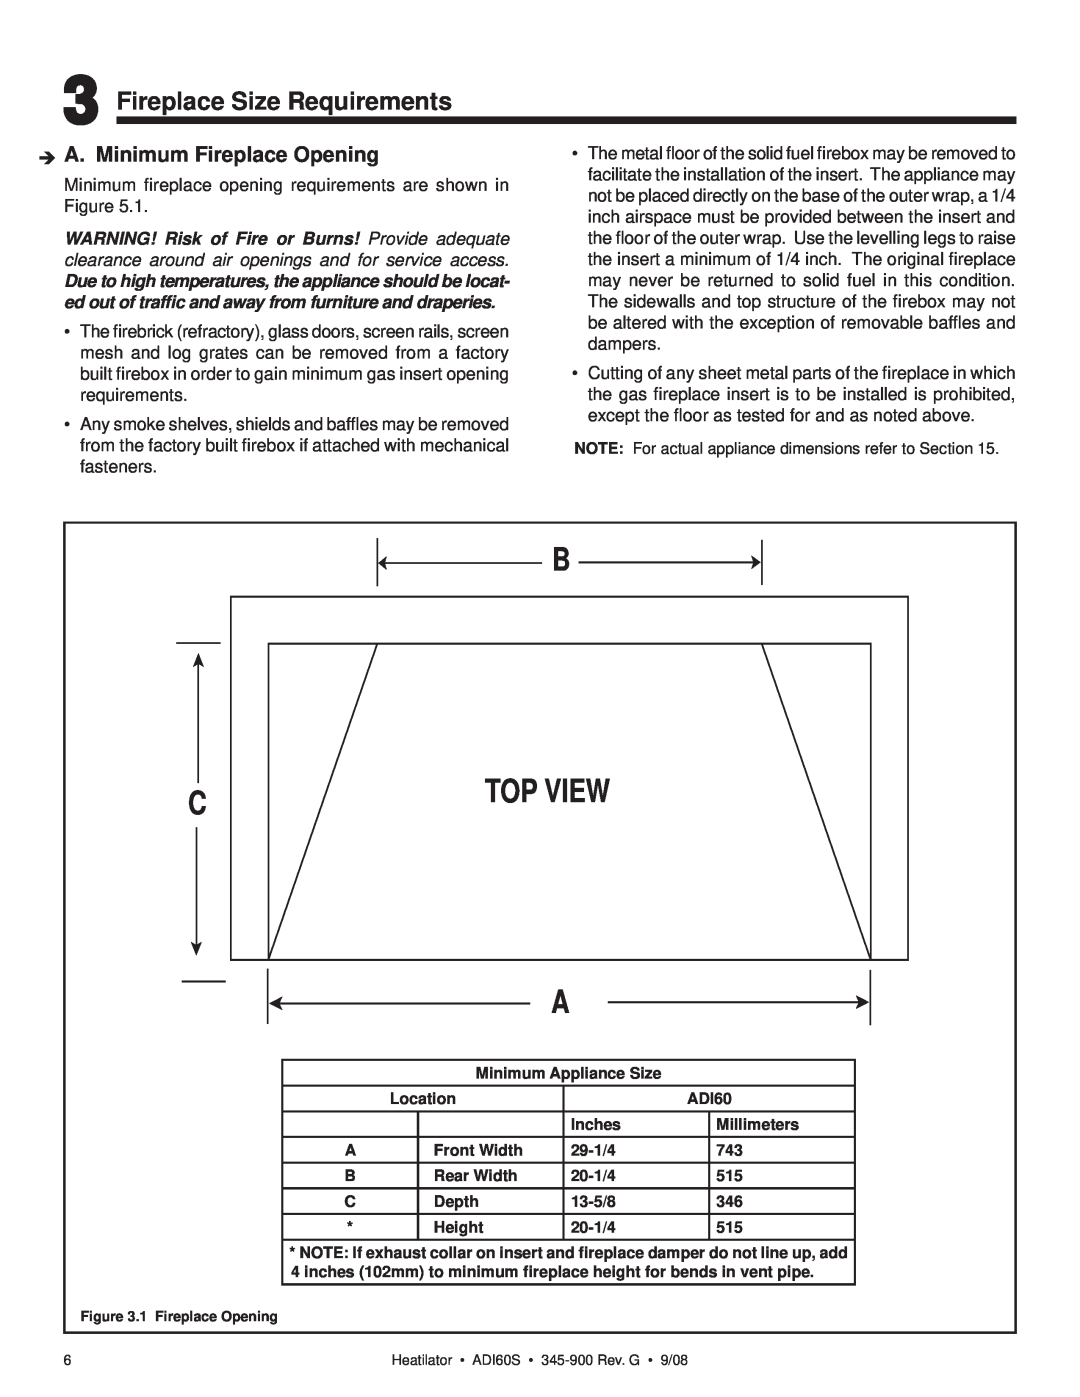 Heatiator ADI60S owner manual Fireplace Size Requirements, Top View, A. Minimum Fireplace Opening 